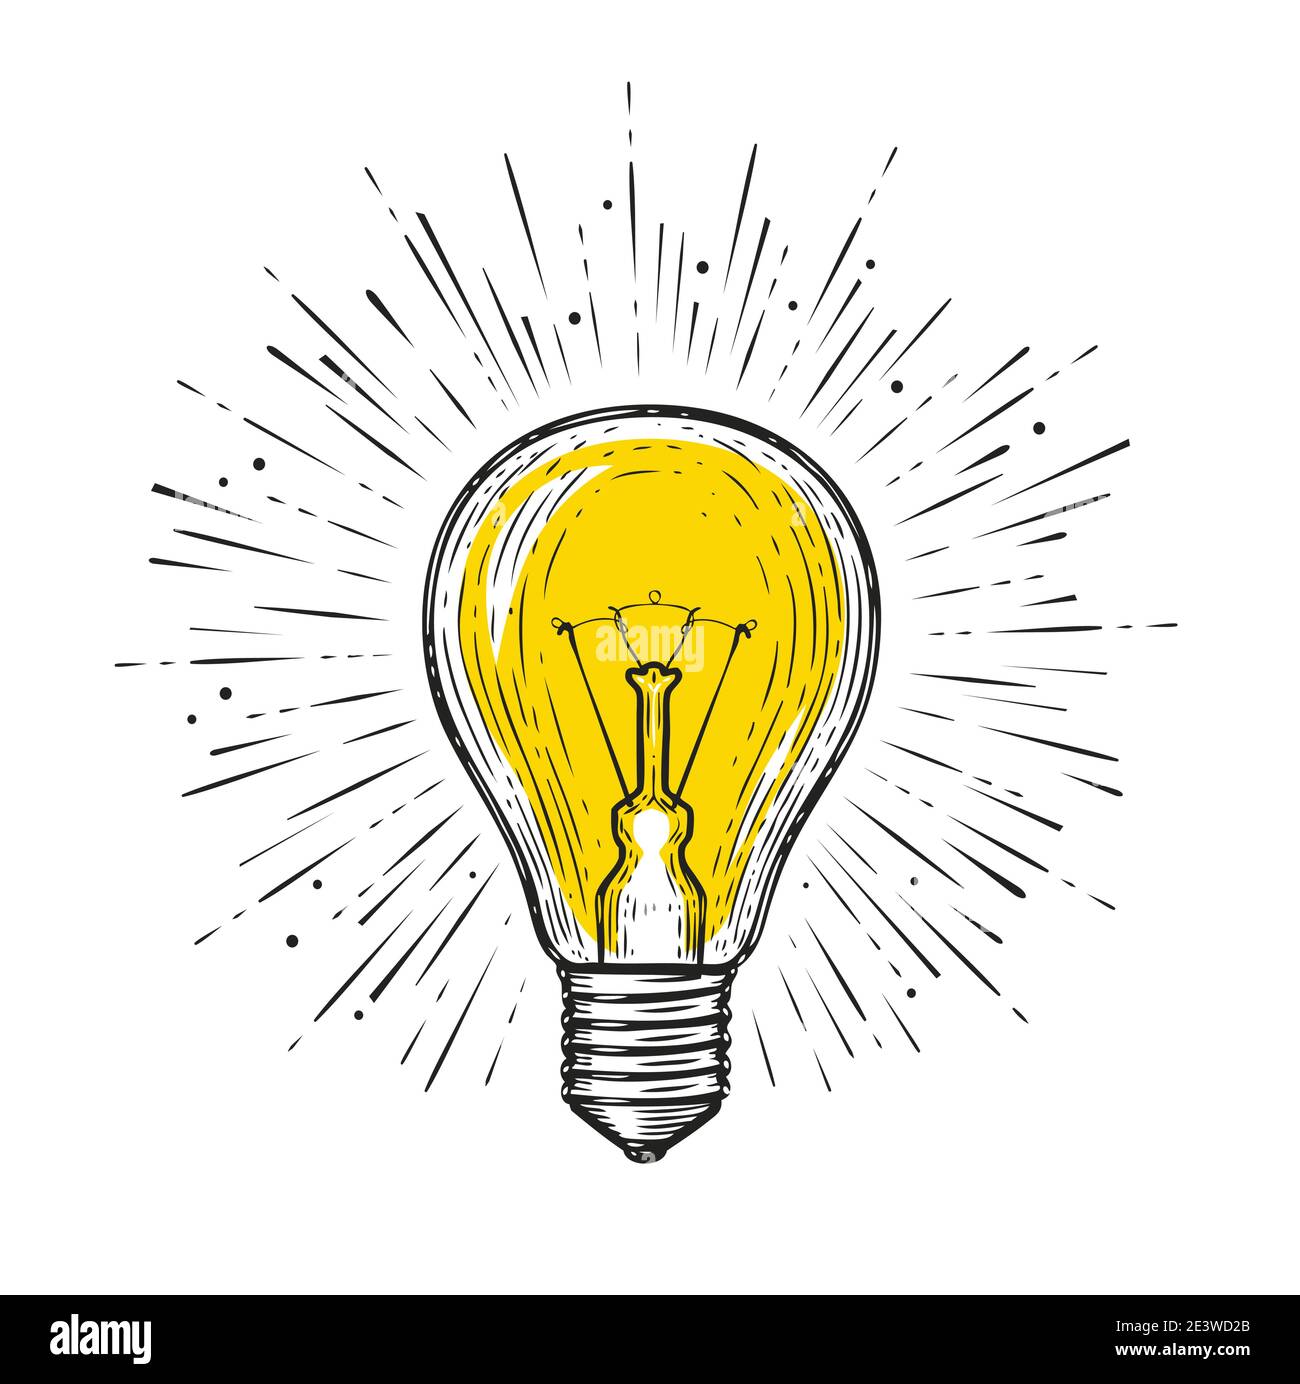 Light bulb glowing. Sketch draw vector illustration. Electric lamp symbol Stock Vector